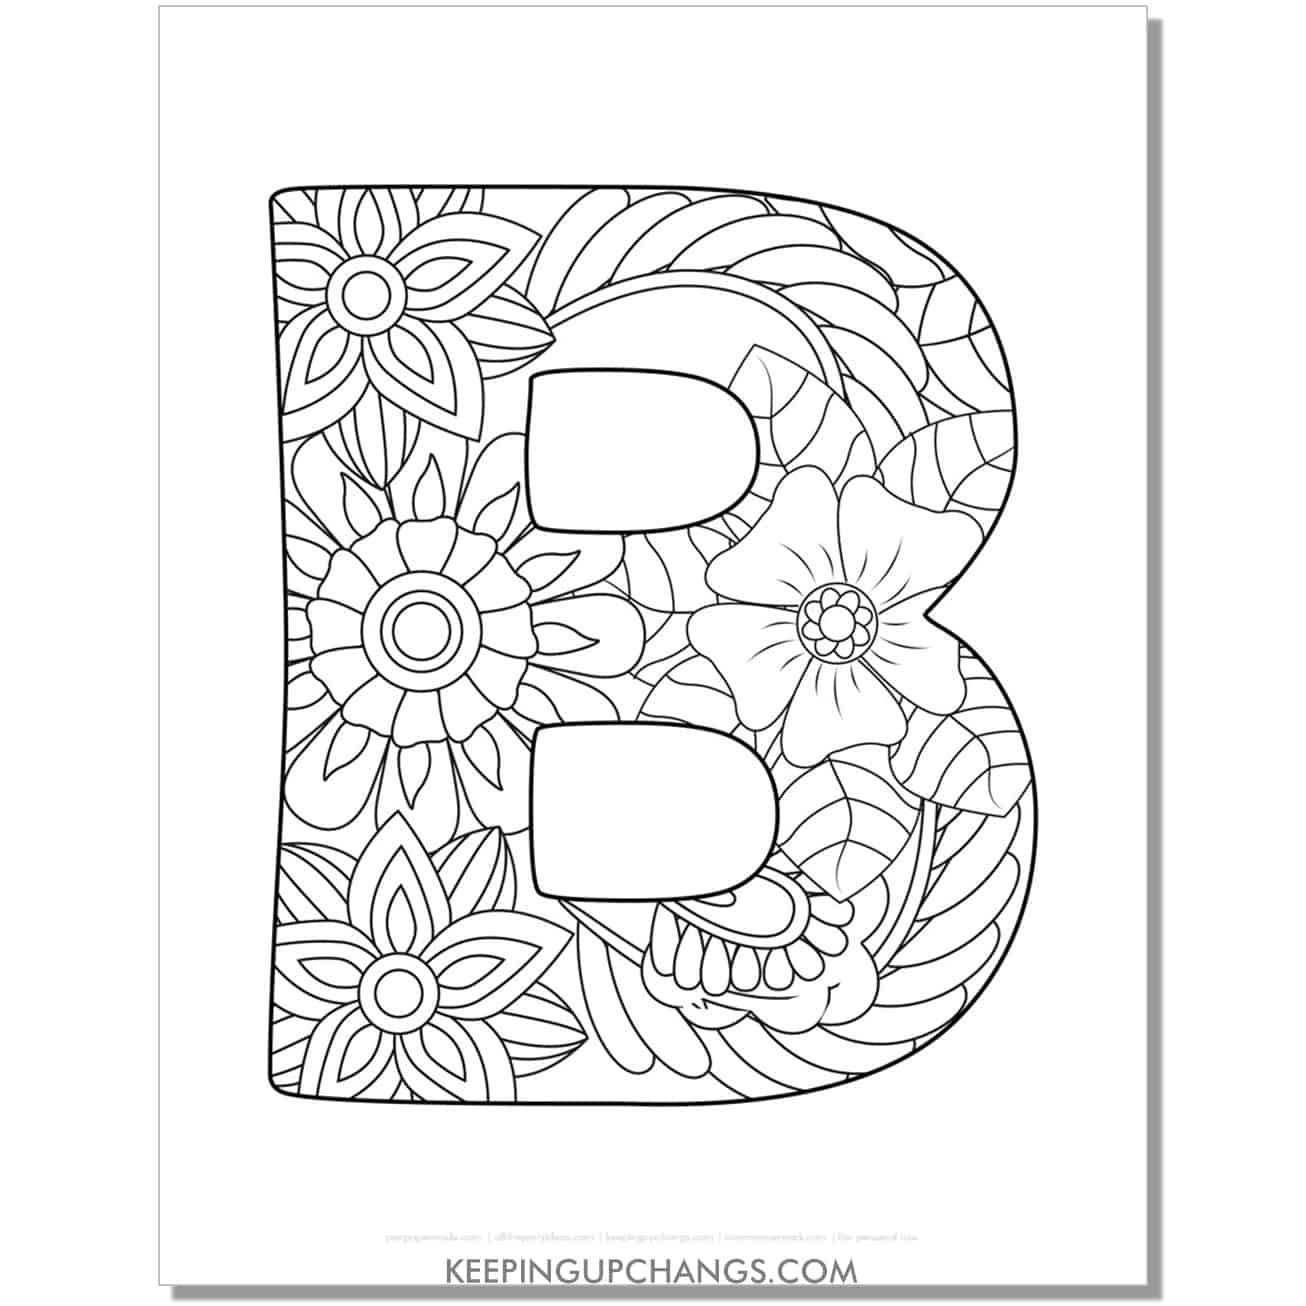 free letter b to color, complex mandala zentangle for adults.